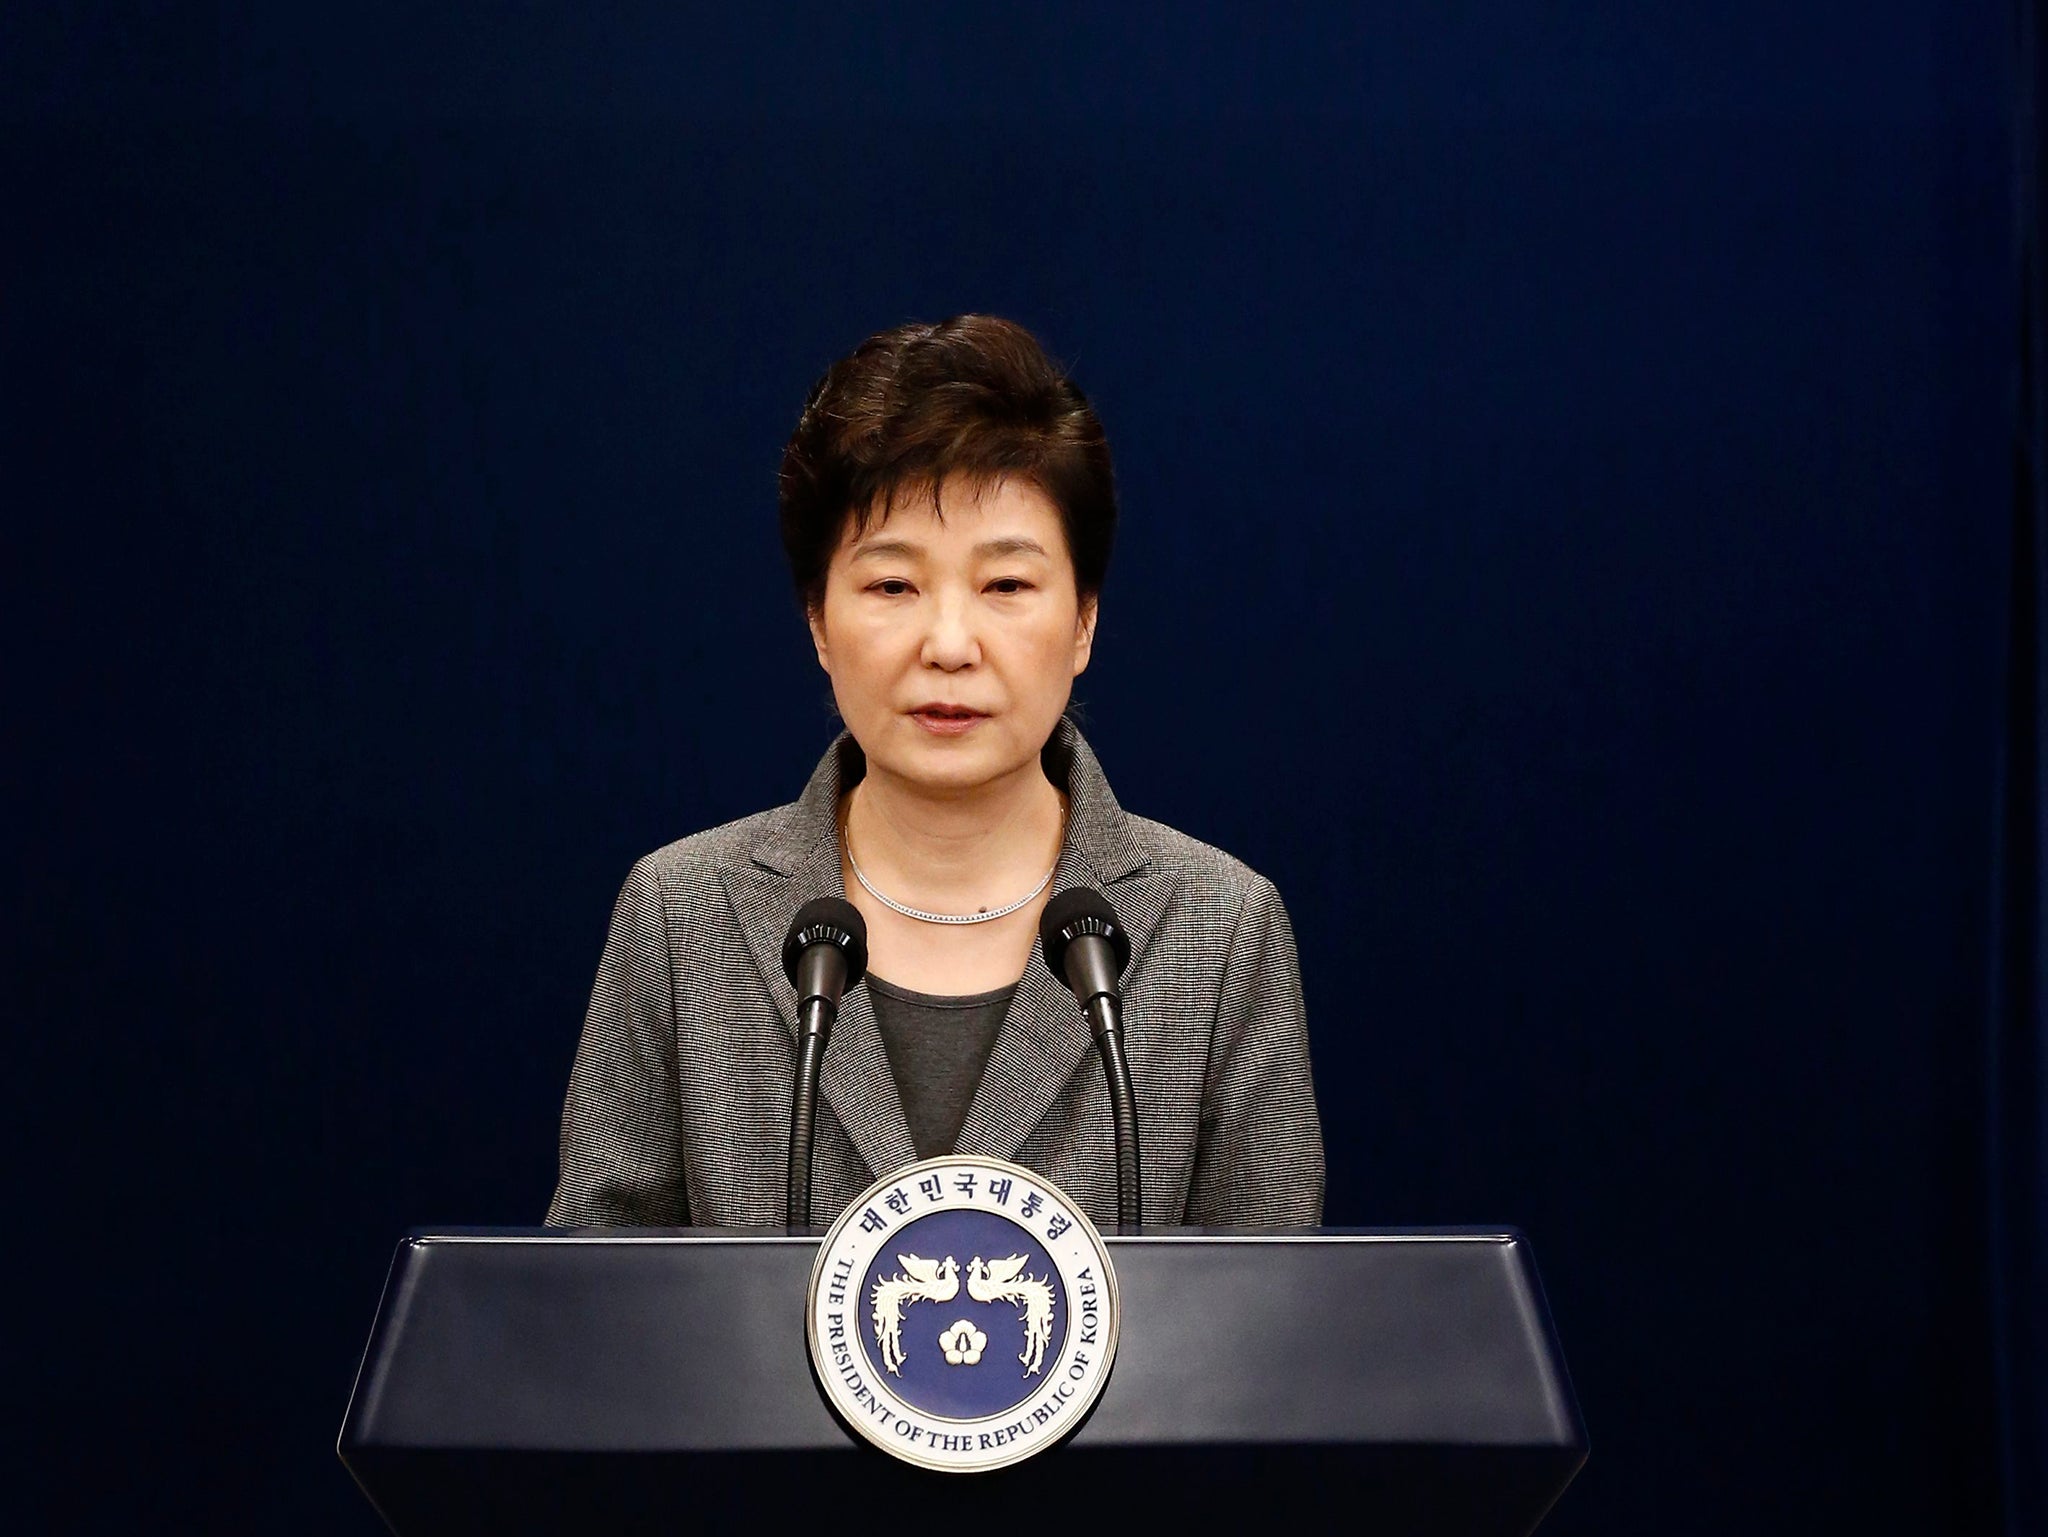 The South Korean parliament has overwhelmingly voted to impeach president Park Geun-hye